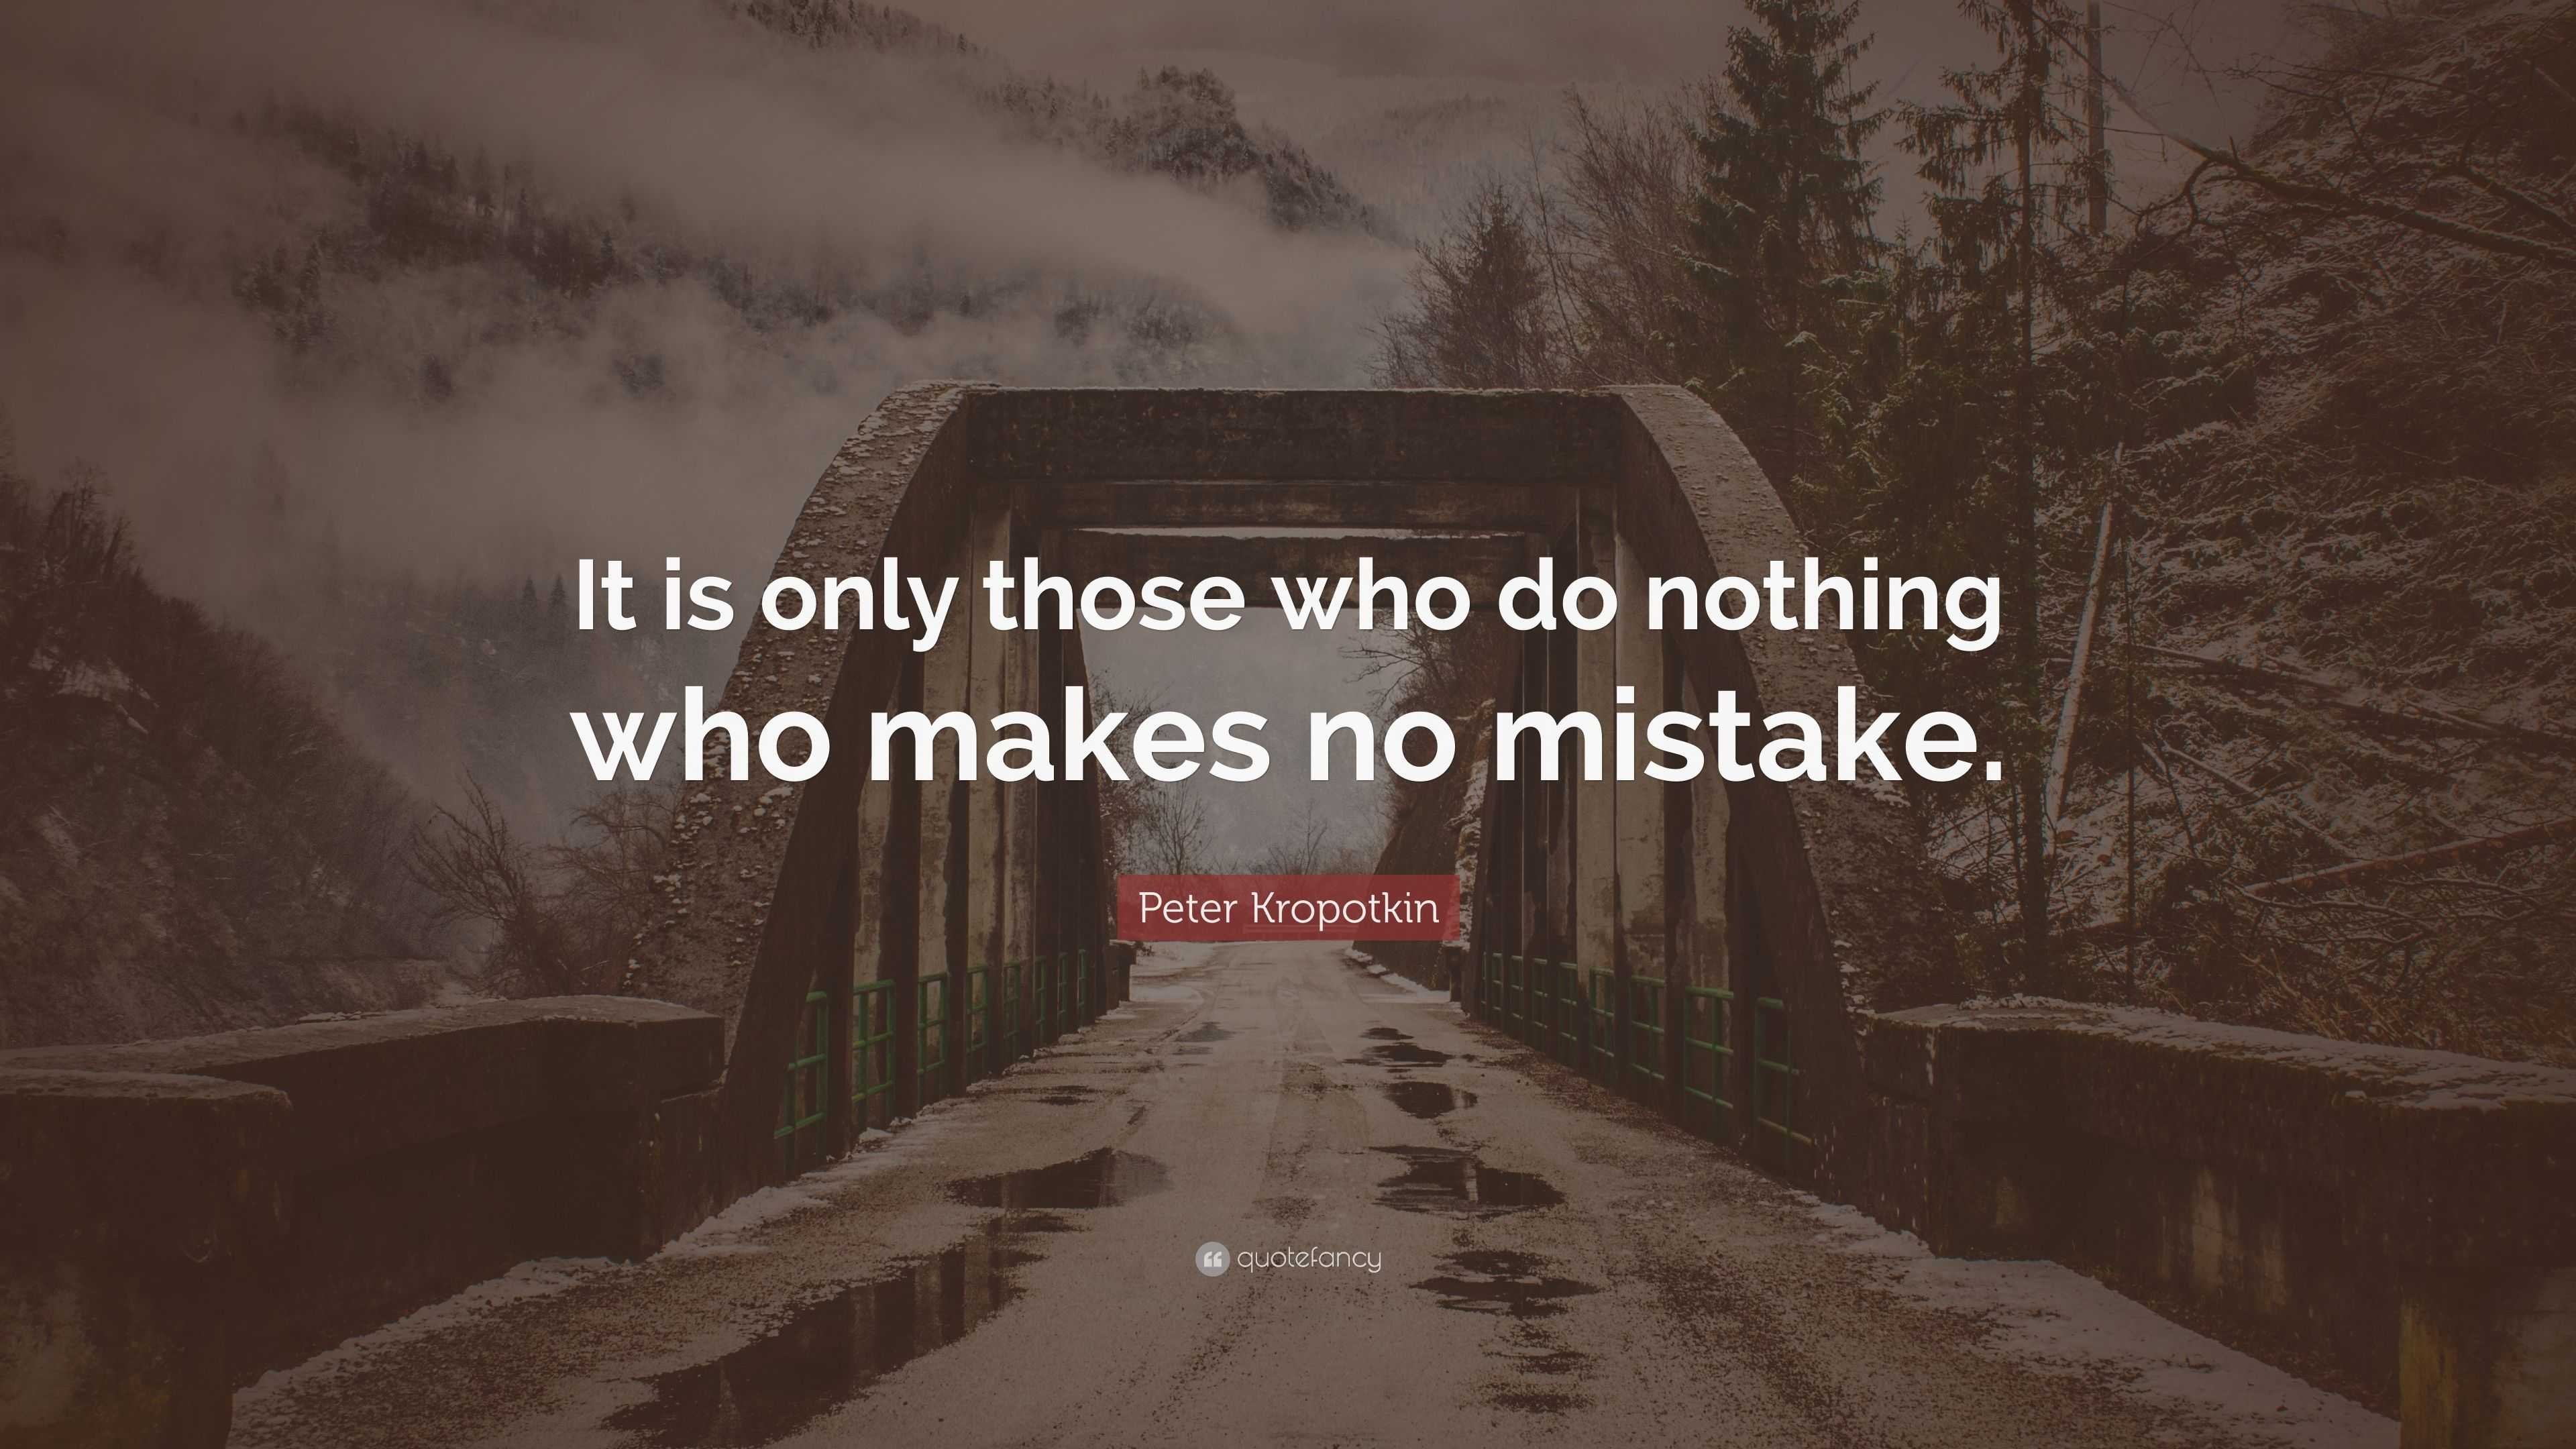 Peter Kropotkin Quote: “It is only those who do nothing who makes no ...